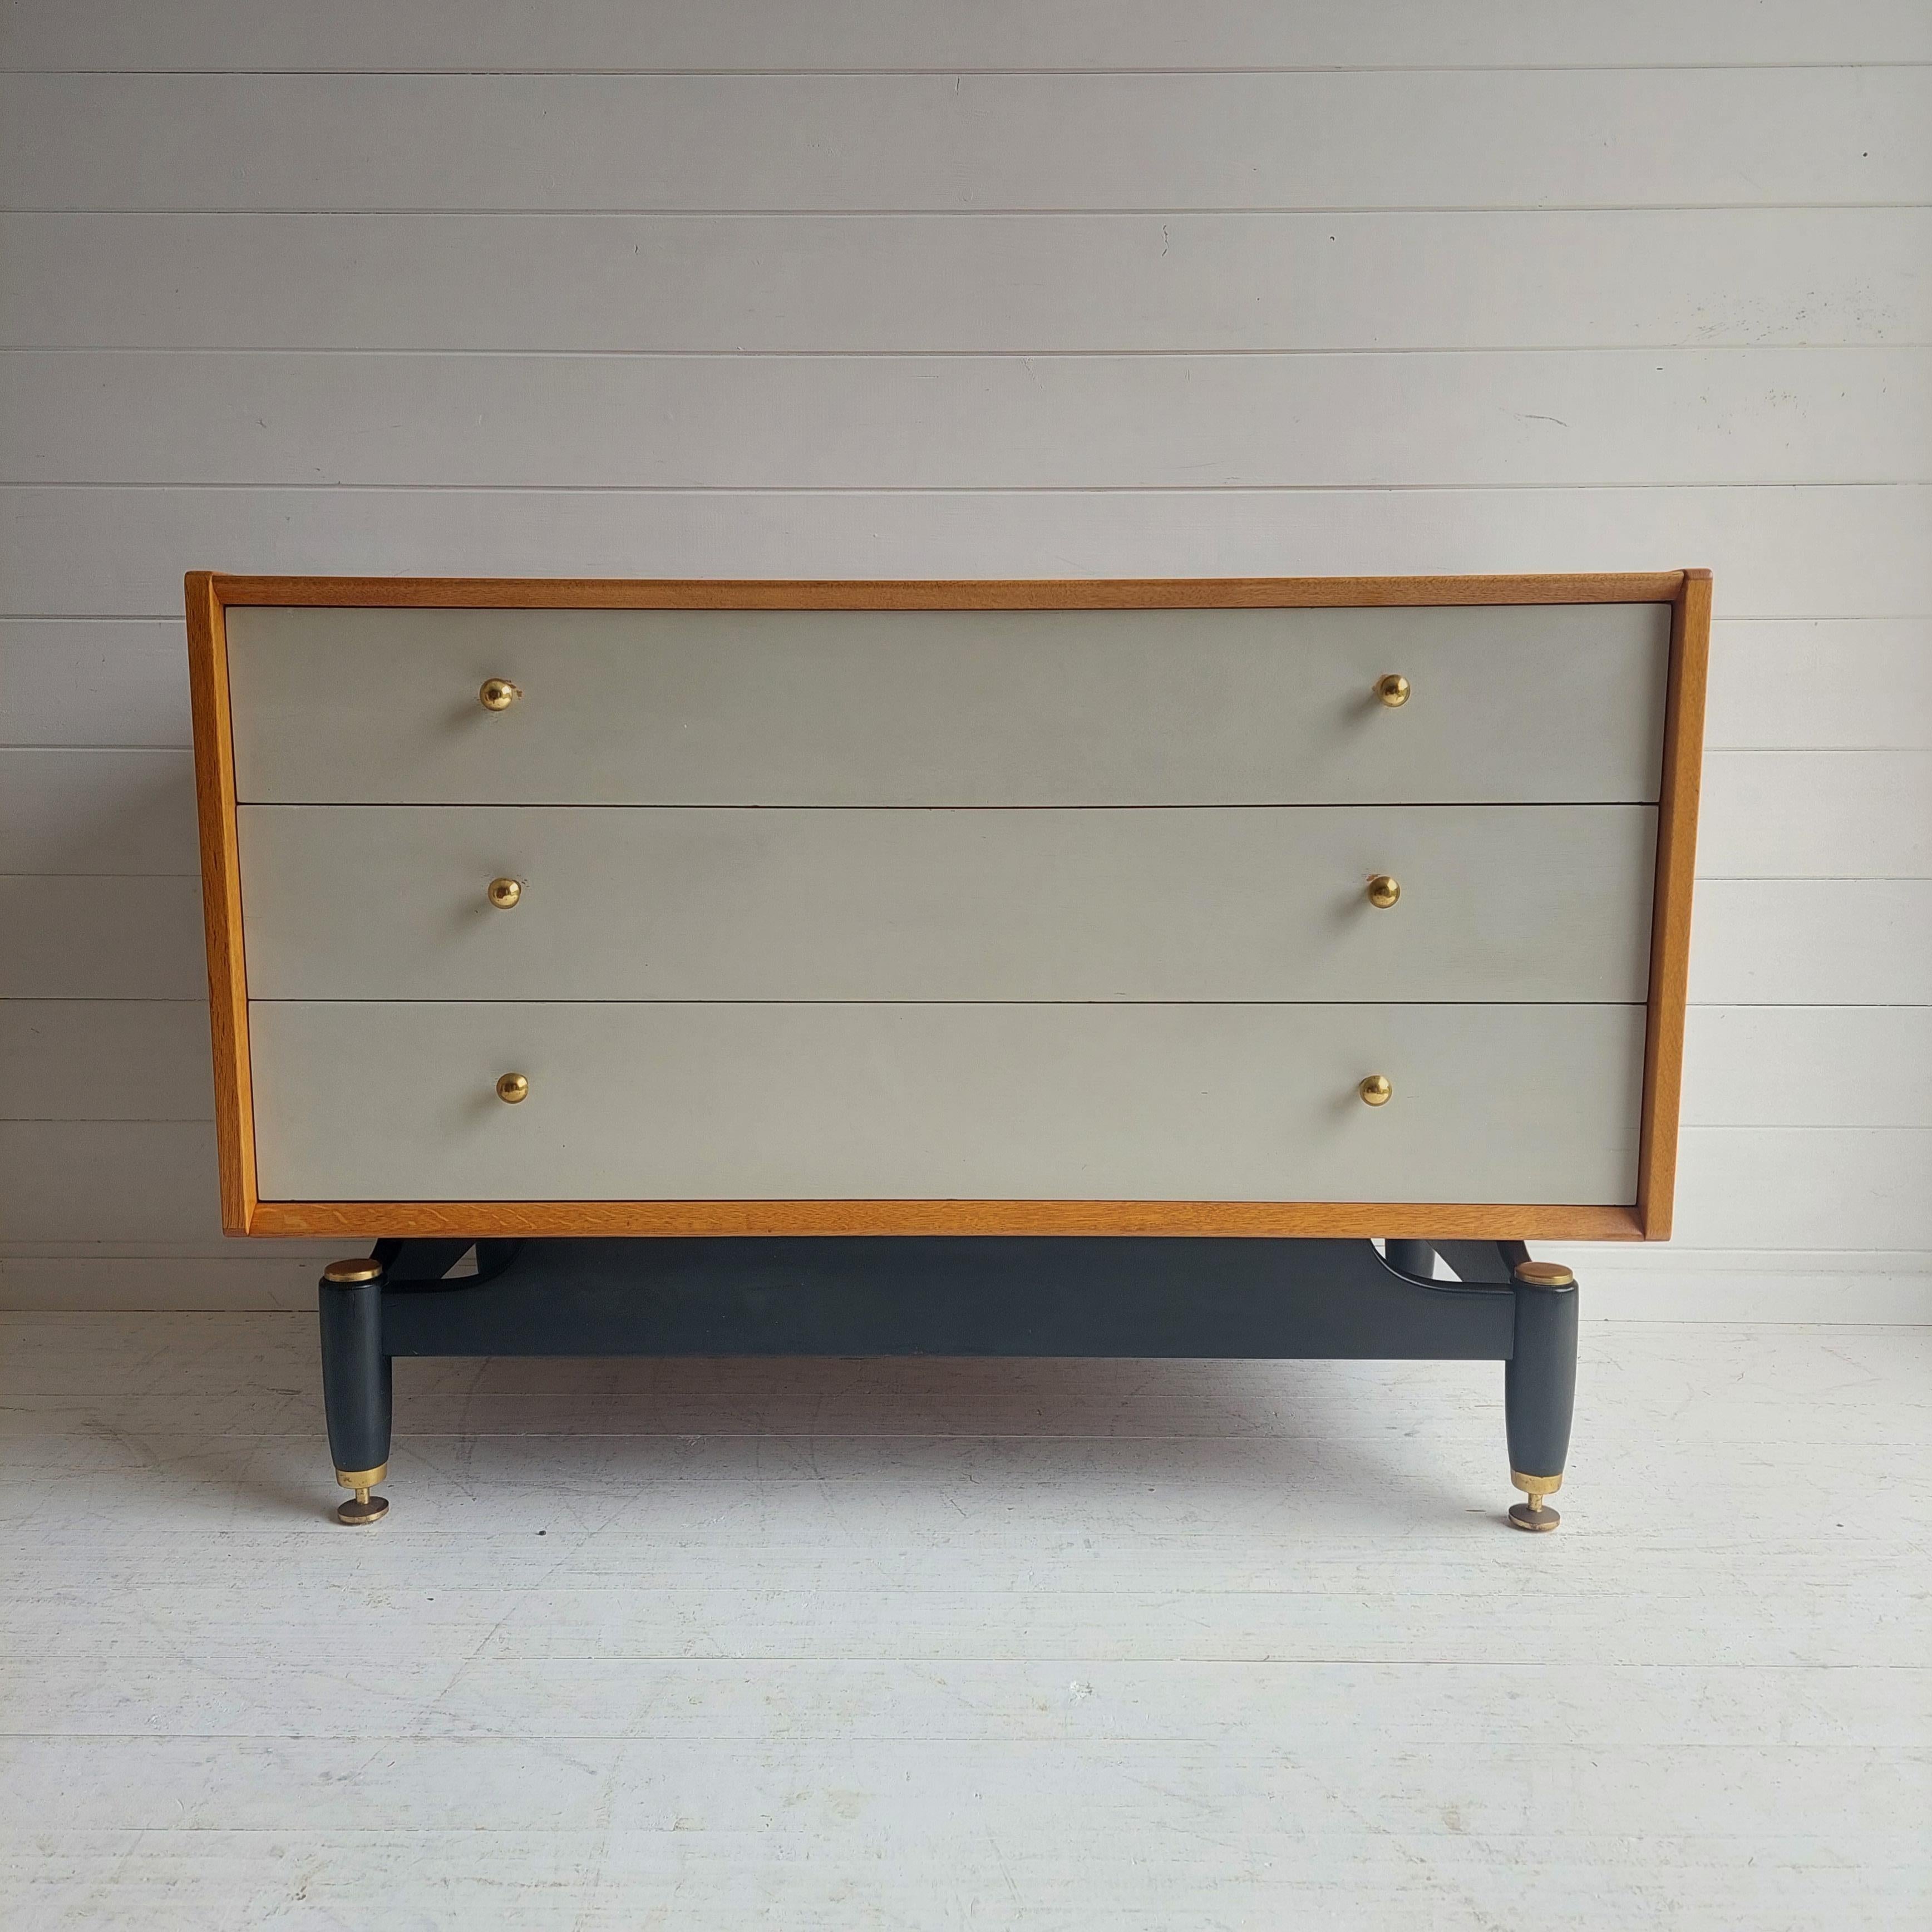 A beautifully designed & crafted, scarcely seen chest of drawers manufactured by E-Gomme for G-Plan of Great Britain. 
This three drawer chest formed part of the 'China White' range which was introduced in 1956.

Condition:
Very good restored